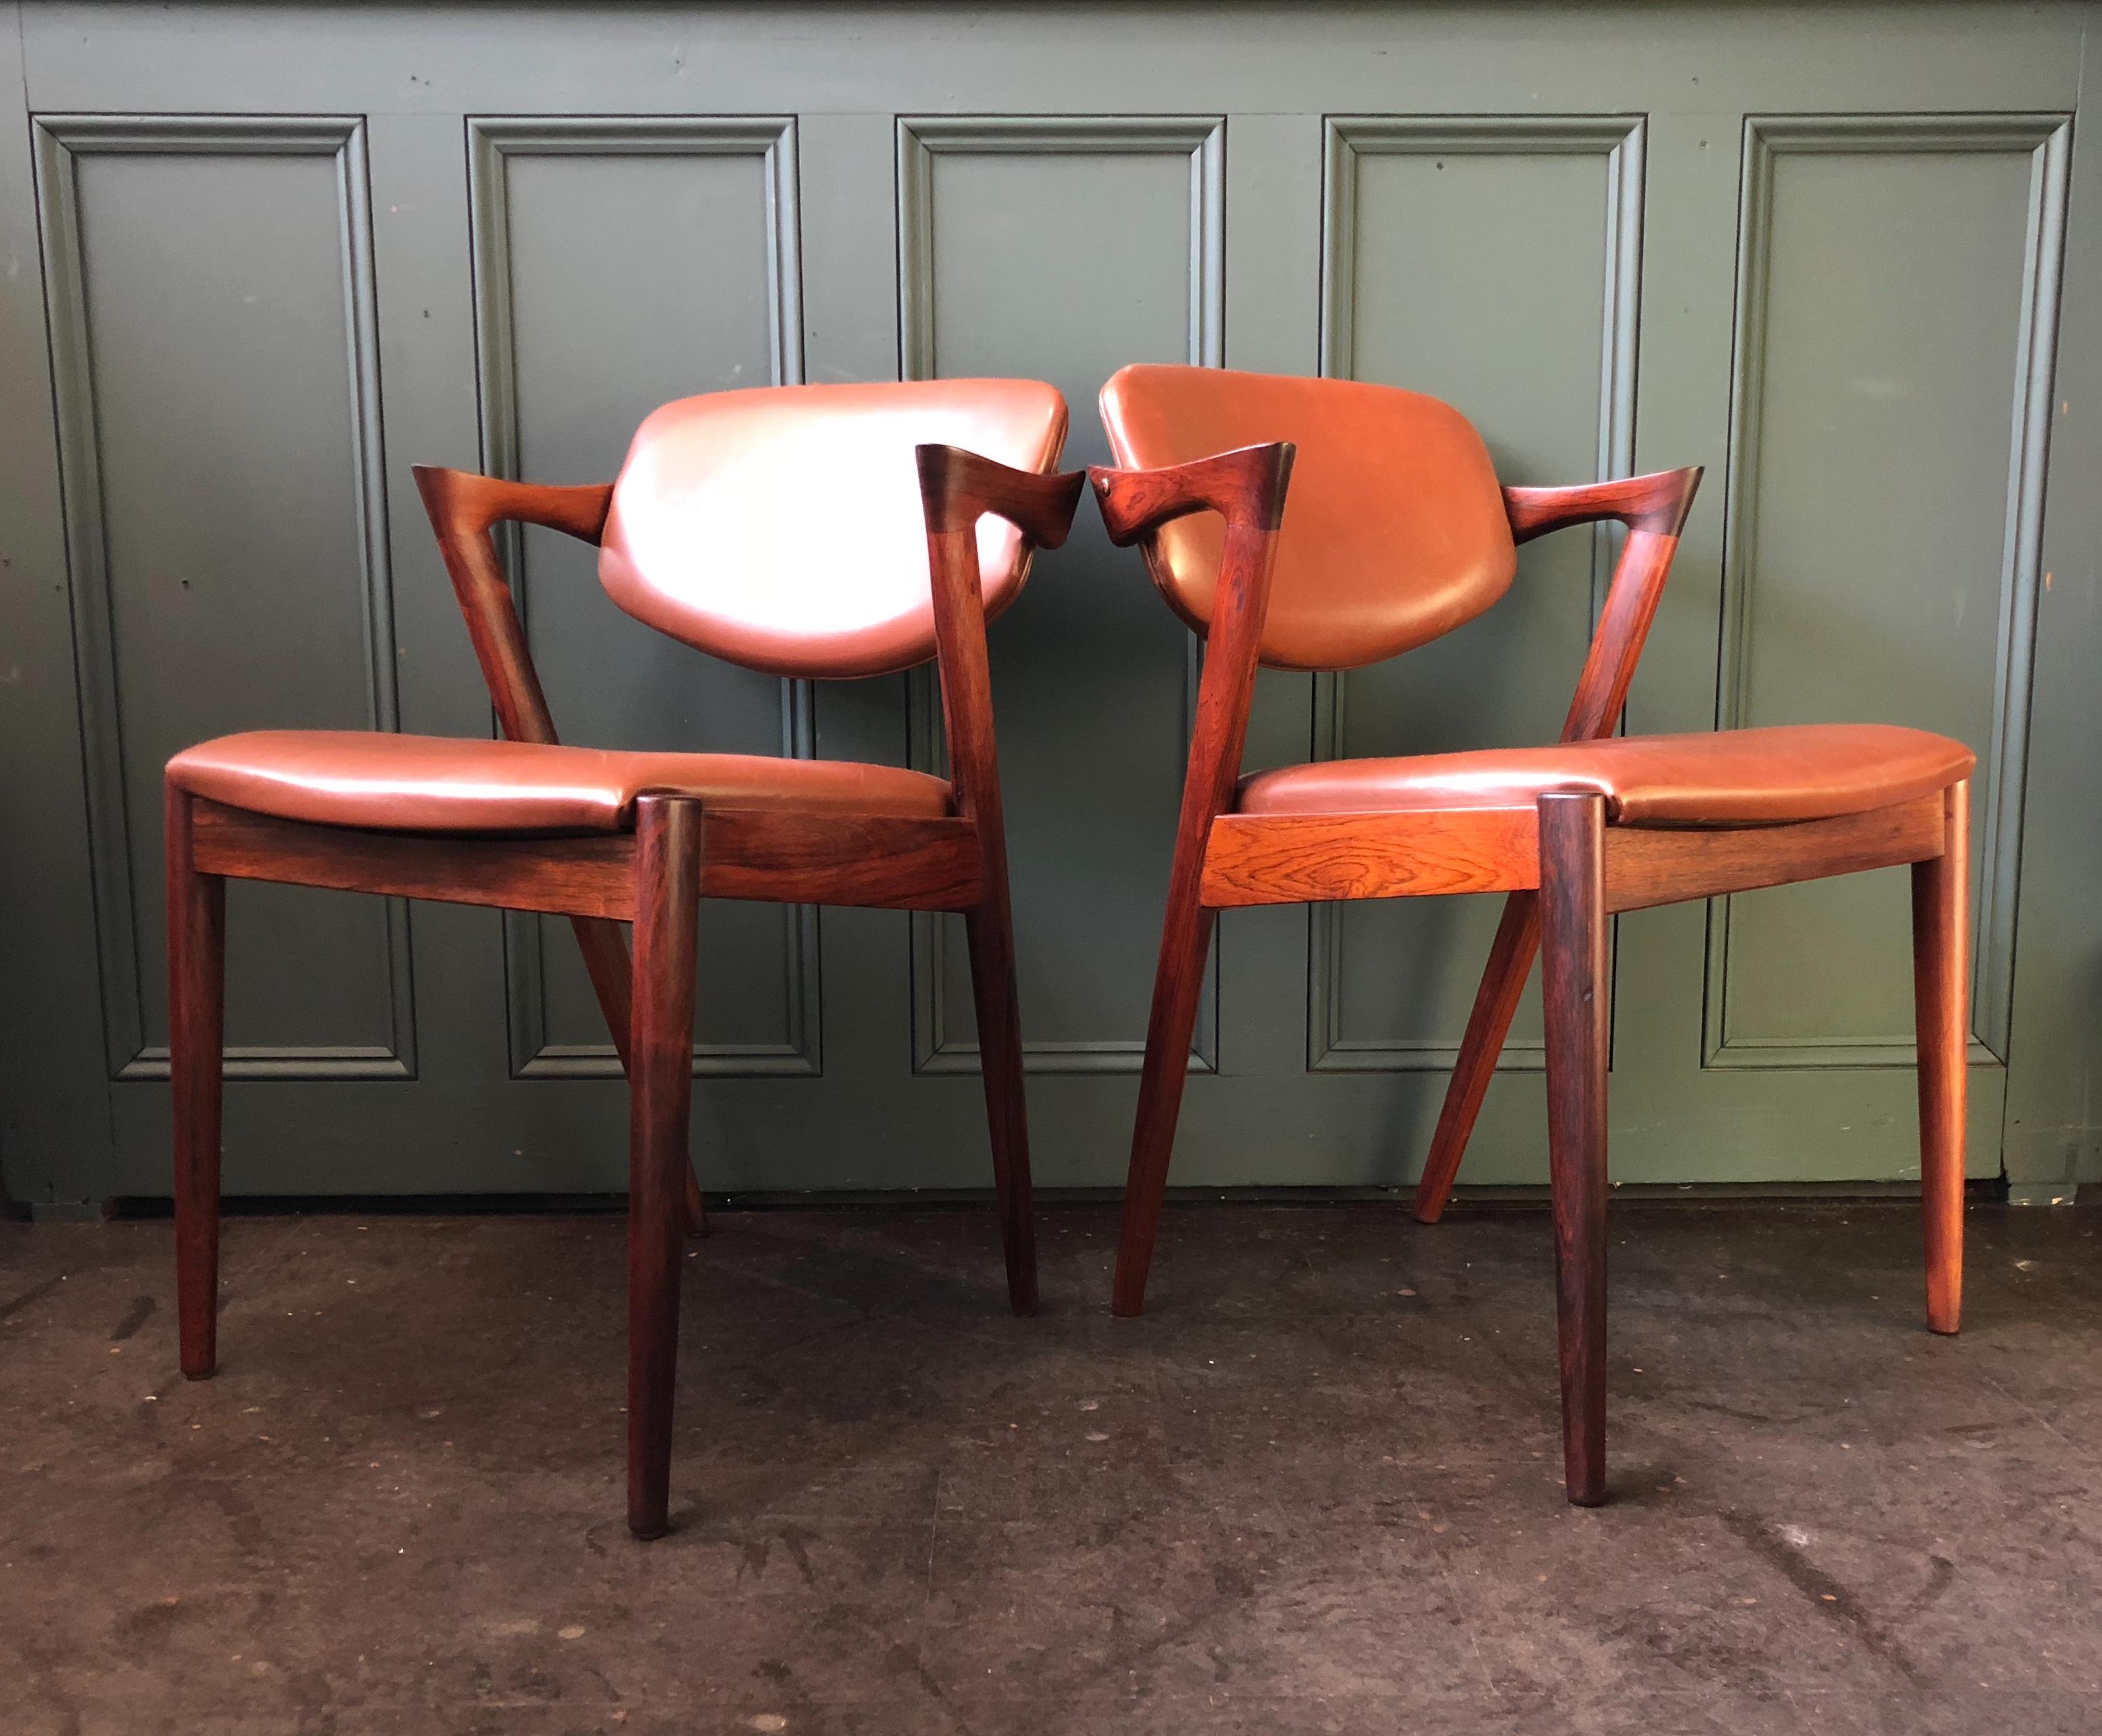 Lovely matching pair (more in stock) of rosewood model 42 chairs from Kai Kristiansen. Mid brown original leather upholstery, circa 1960. The frames have a superb coloring and figuring. In great vintage condition, thoroughly cleaned and re-oiled.
 